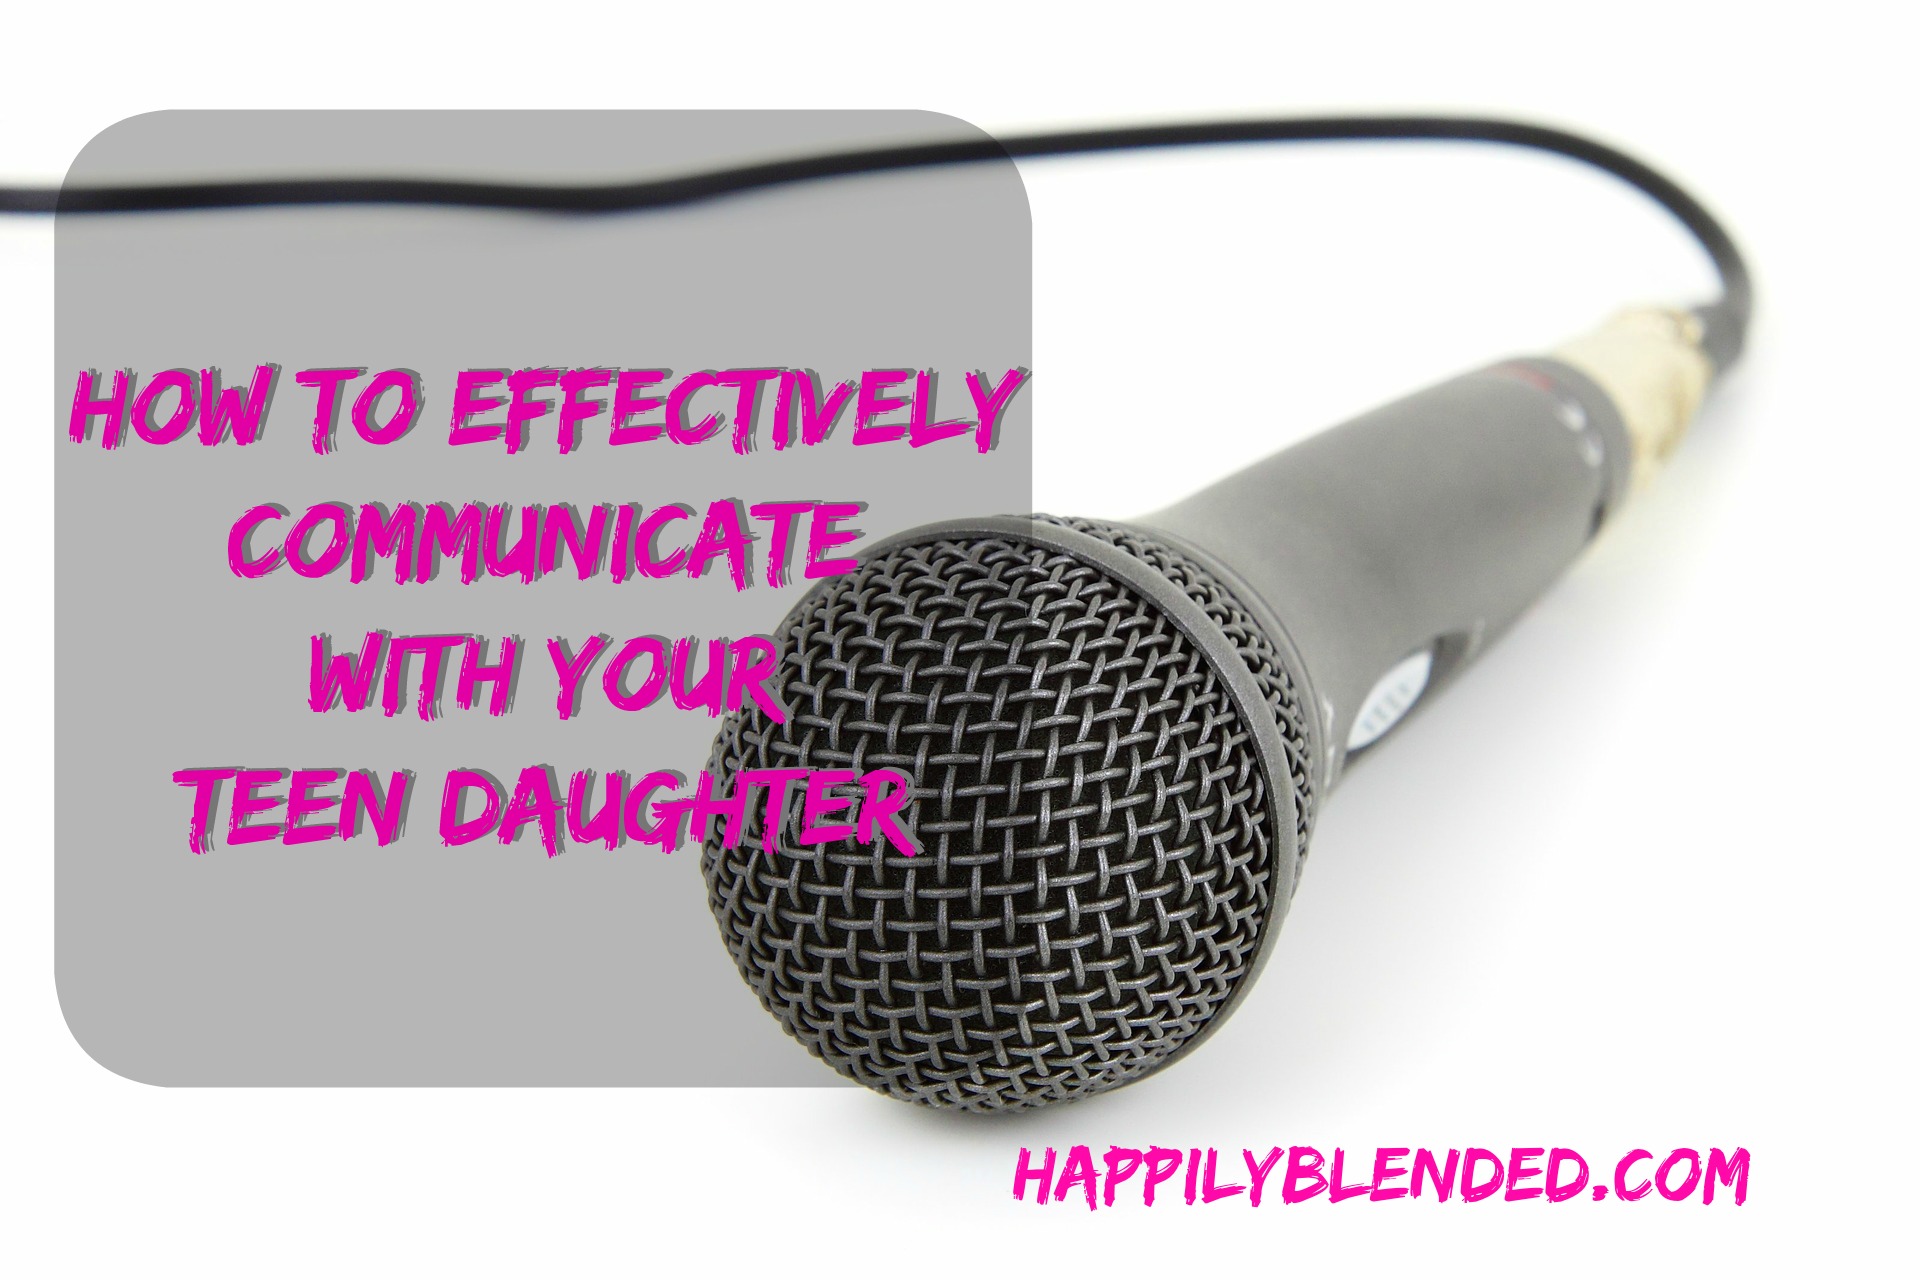 How to Effectively Communicate with your Teen Daughter